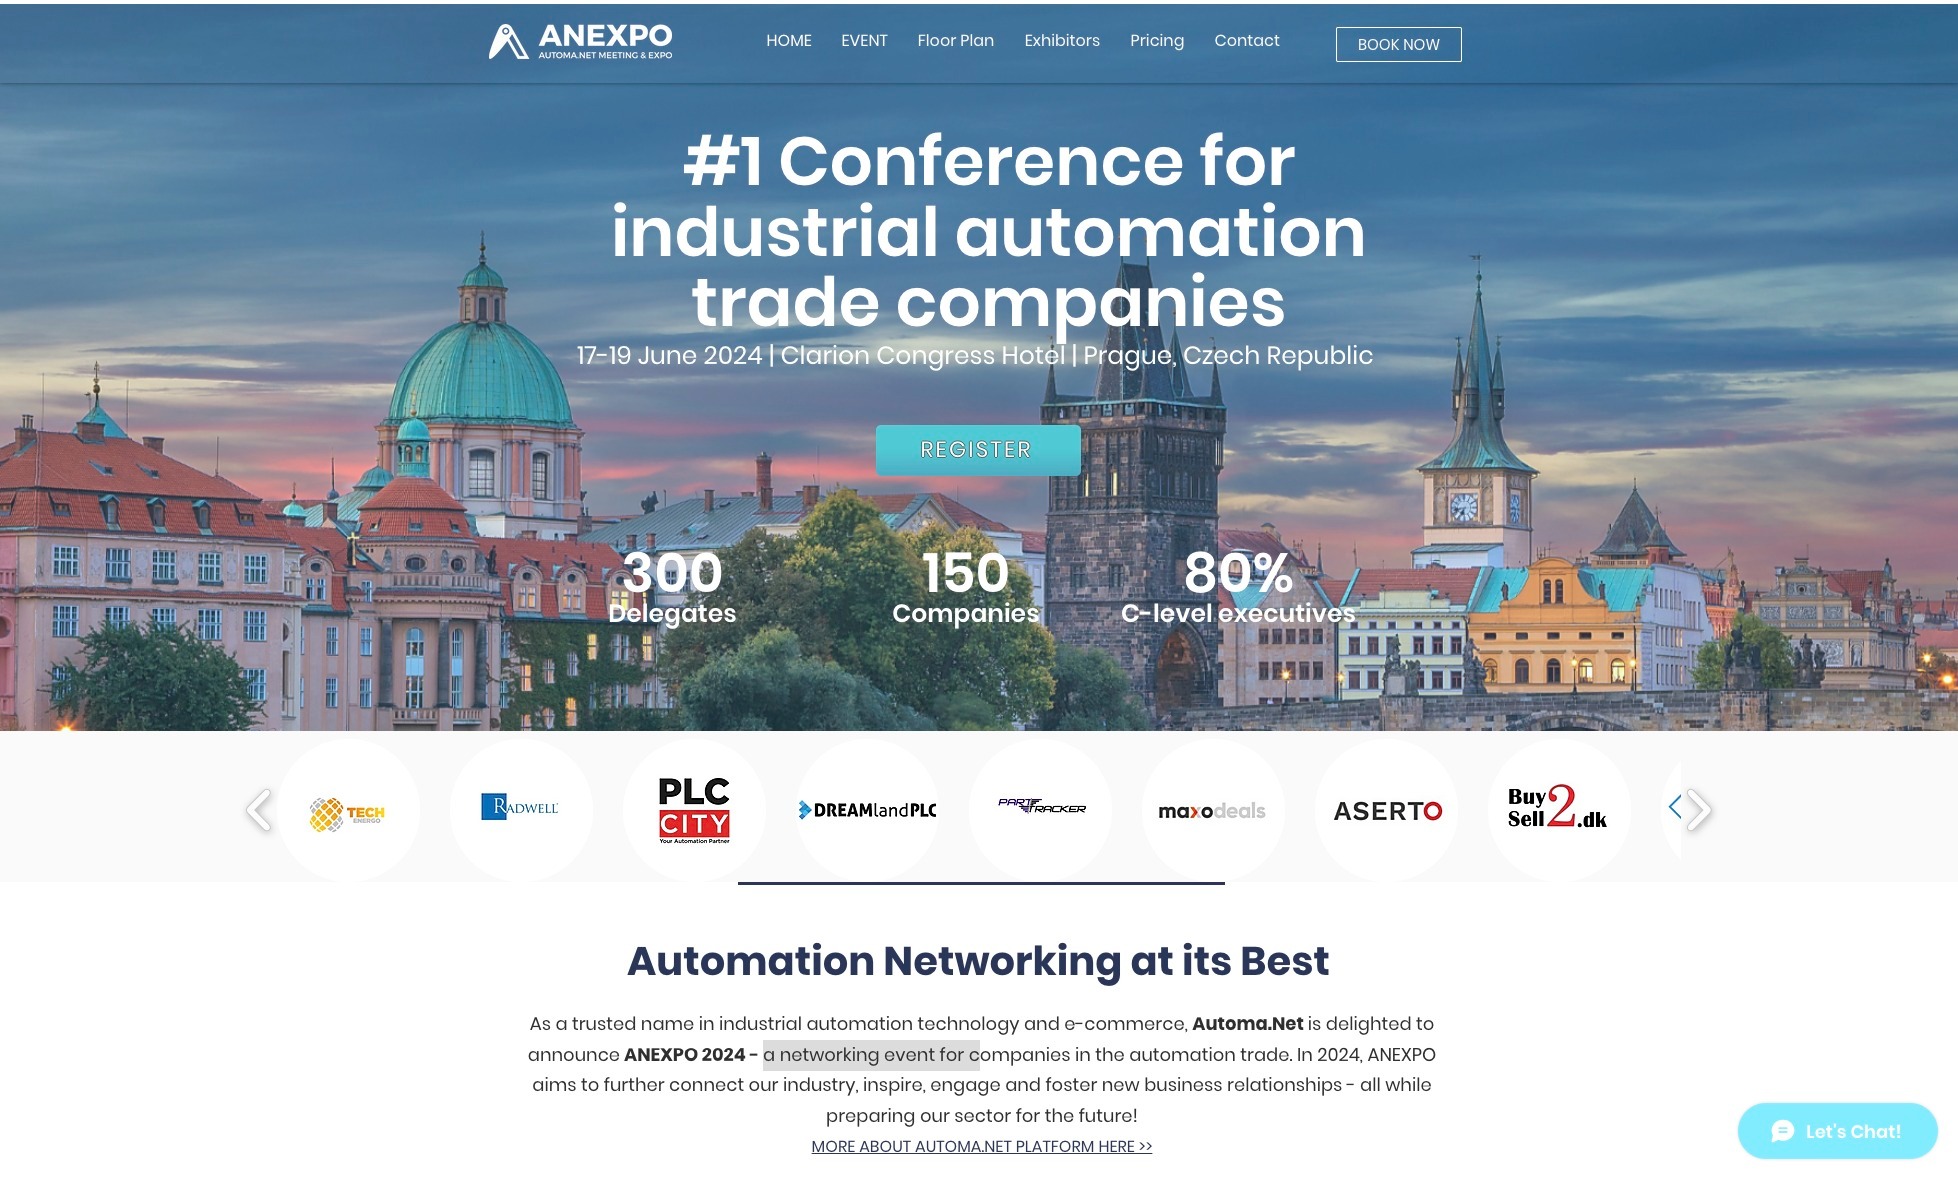 ANEXPO - Conference for industrial automation trade companies. 2024, Prague 17-19 June